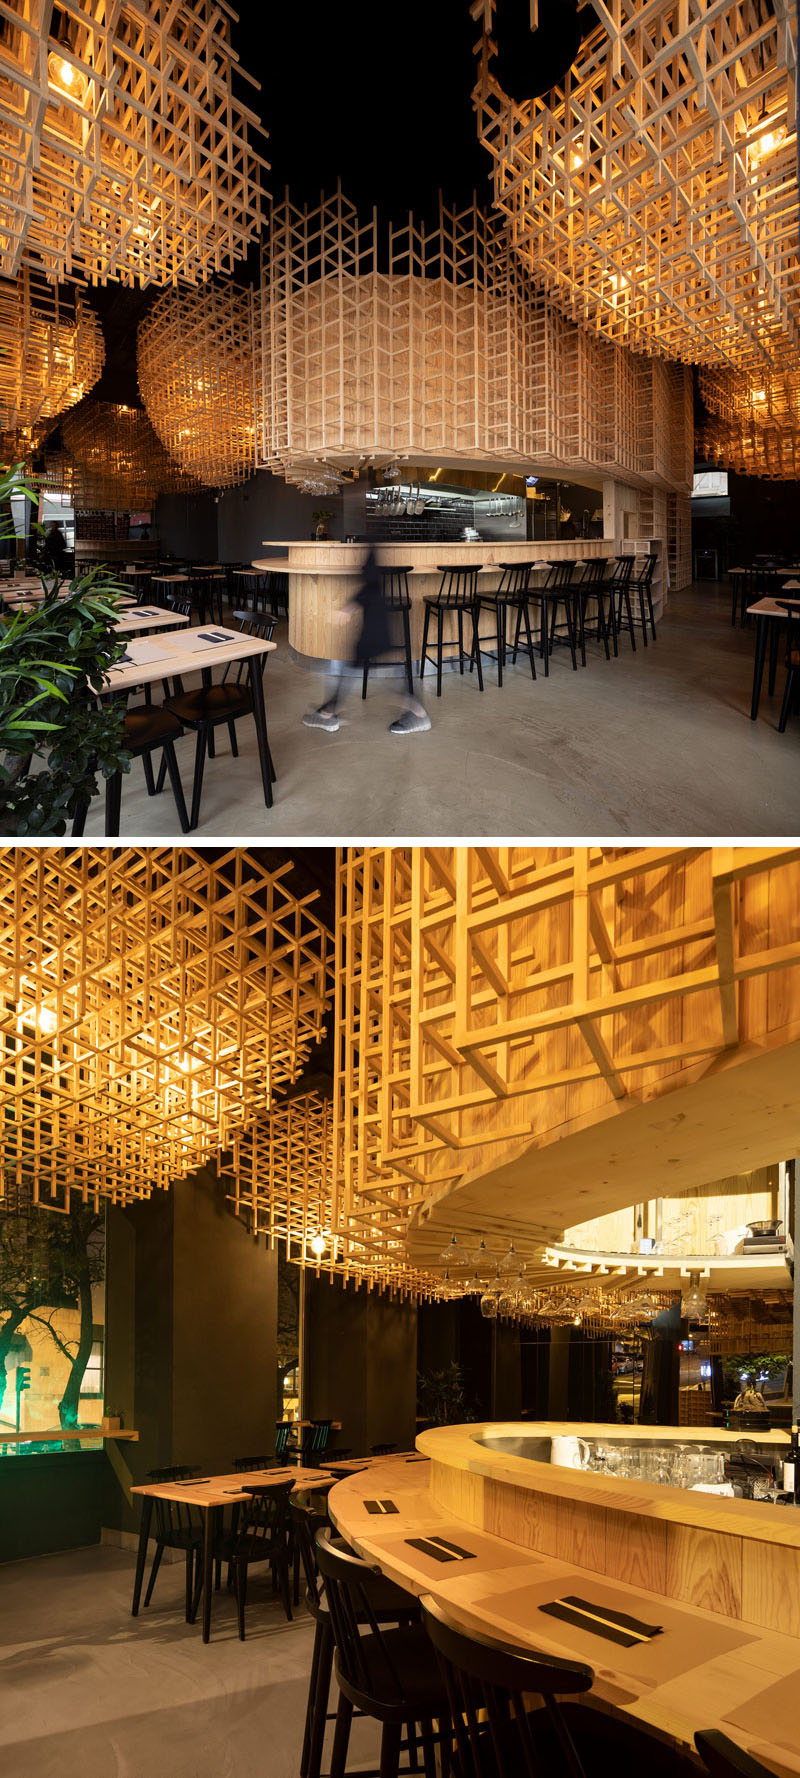 Drawing inspiration from 'Ajitama', the Japanese name for soft-boiled eggs that are usually found in ramen, the designers created sculptural lighting that quickly becomes the focal point of this modern restaurant the minute a guest steps inside. #ModernRestaurant #RestaurantDesign #InteriorDesign #Lighting